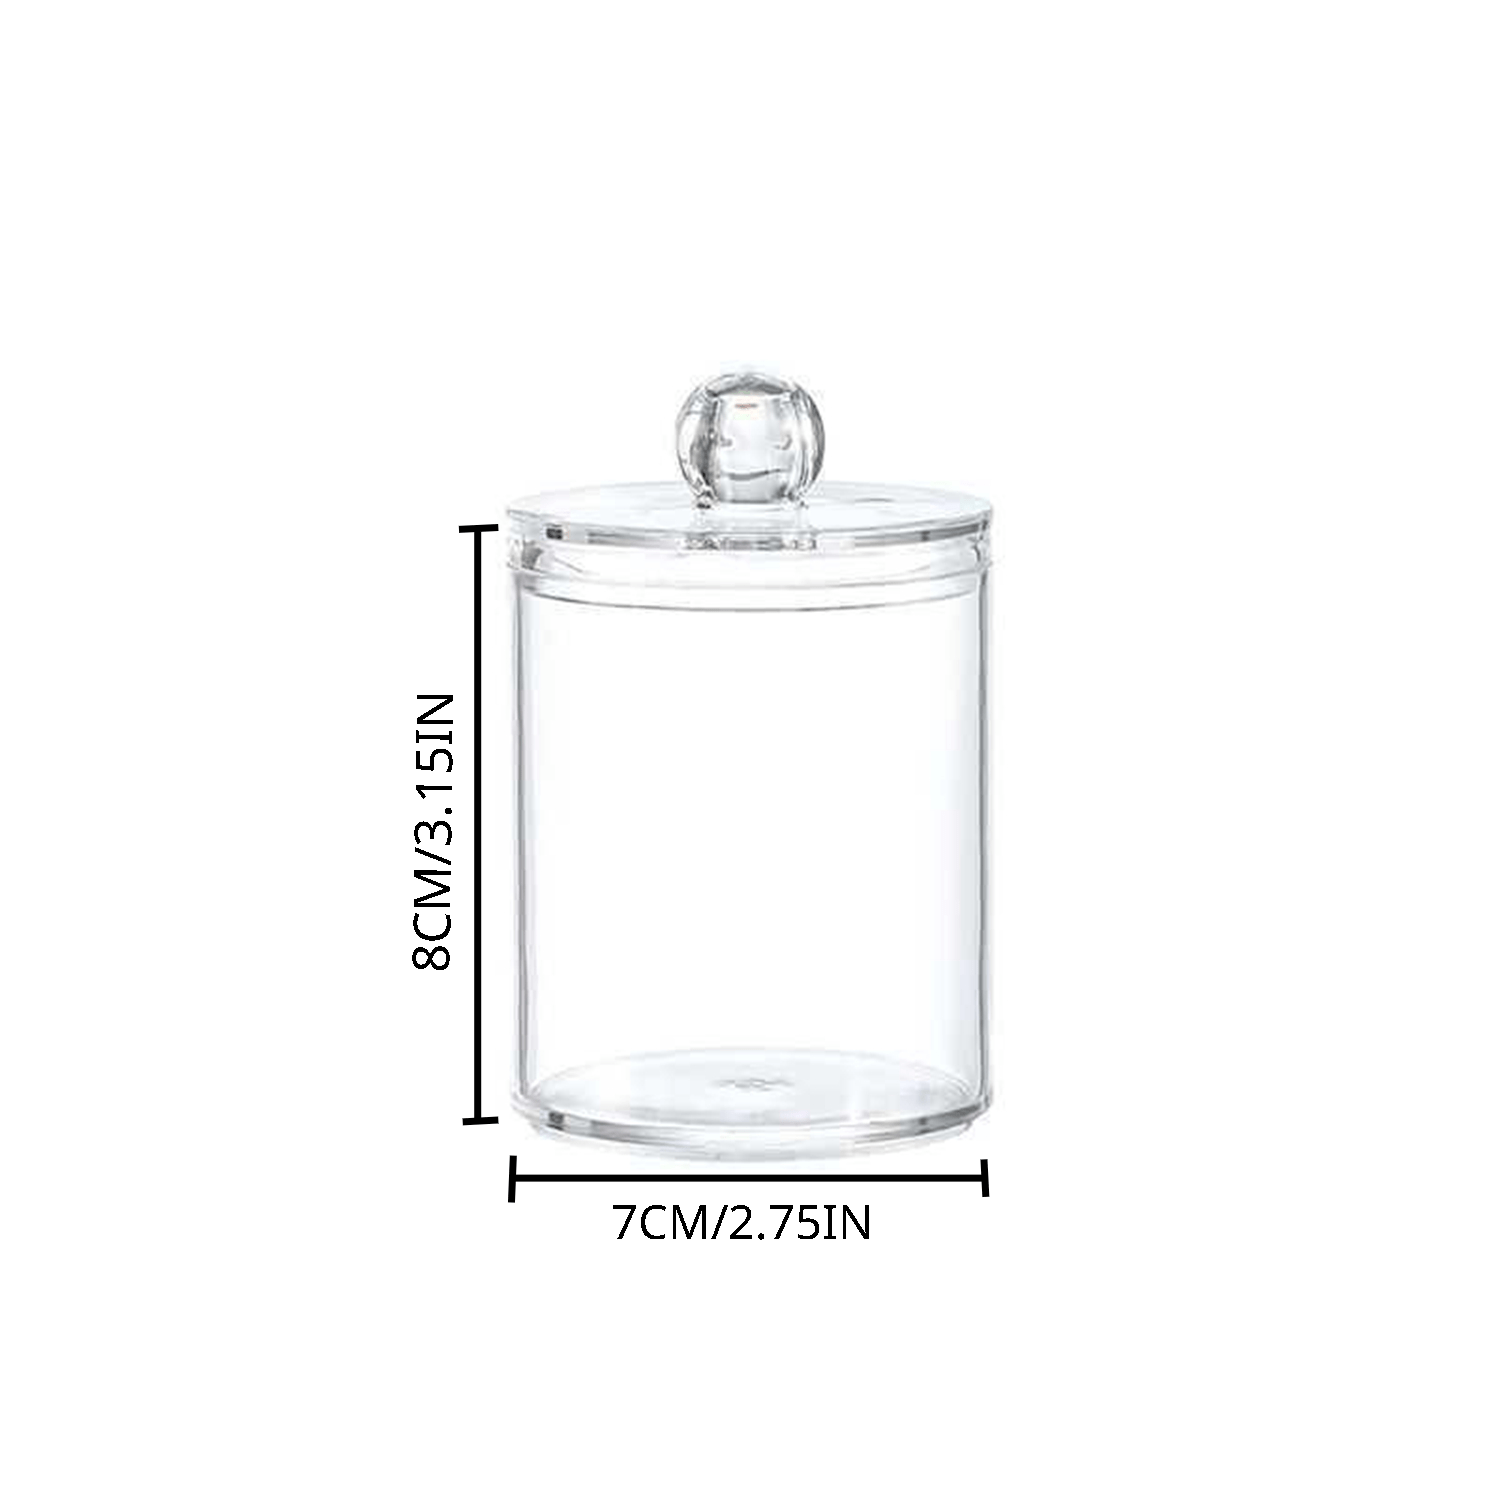 Heldig 1pcs Qtip Holder Dispenser for Cotton Ball, Cotton Swab, Cotton  Round Pads, Floss - 3 Oz Clear Plastic Apothecary Jar for Bathroom Canister  Storage Organization, Vanity Makeup OrganizerB 